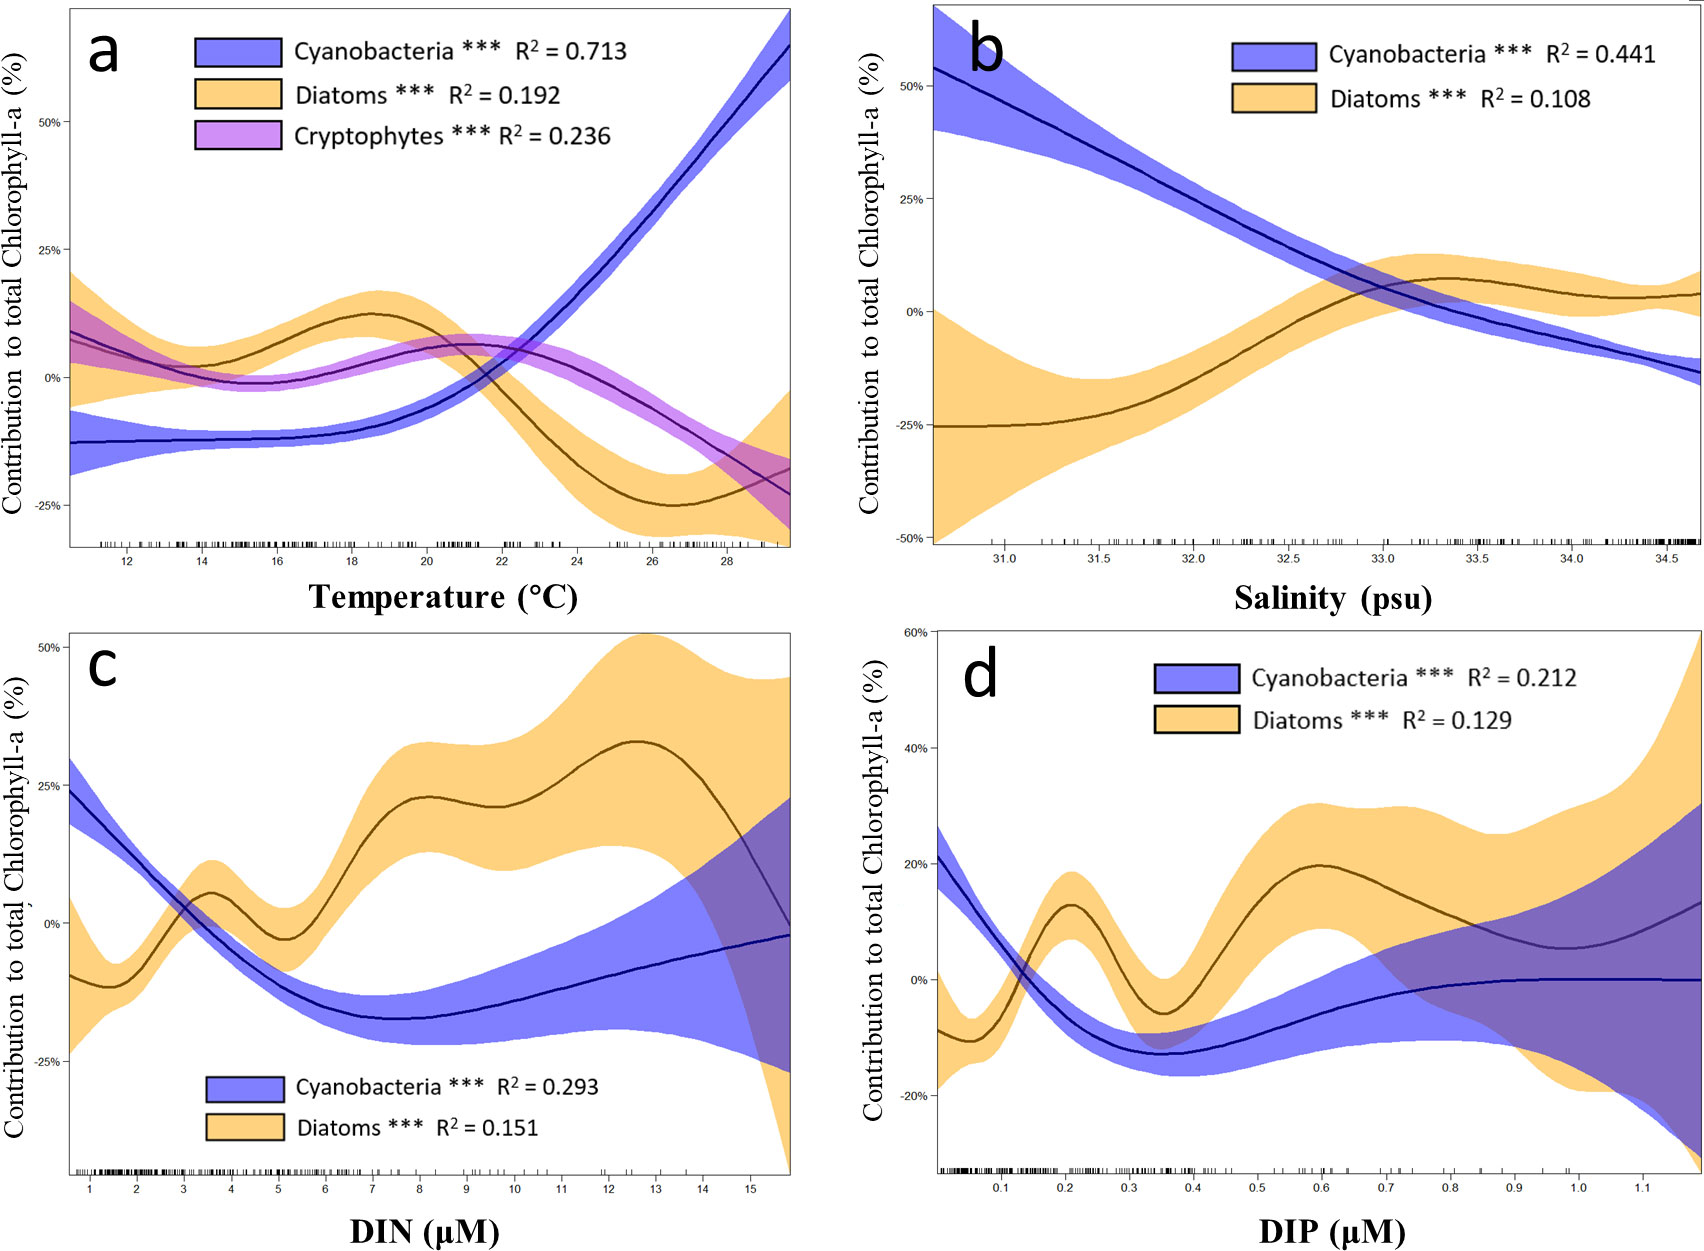 Spatial-temporal distributions of chlorophyll a content (μg/L) in